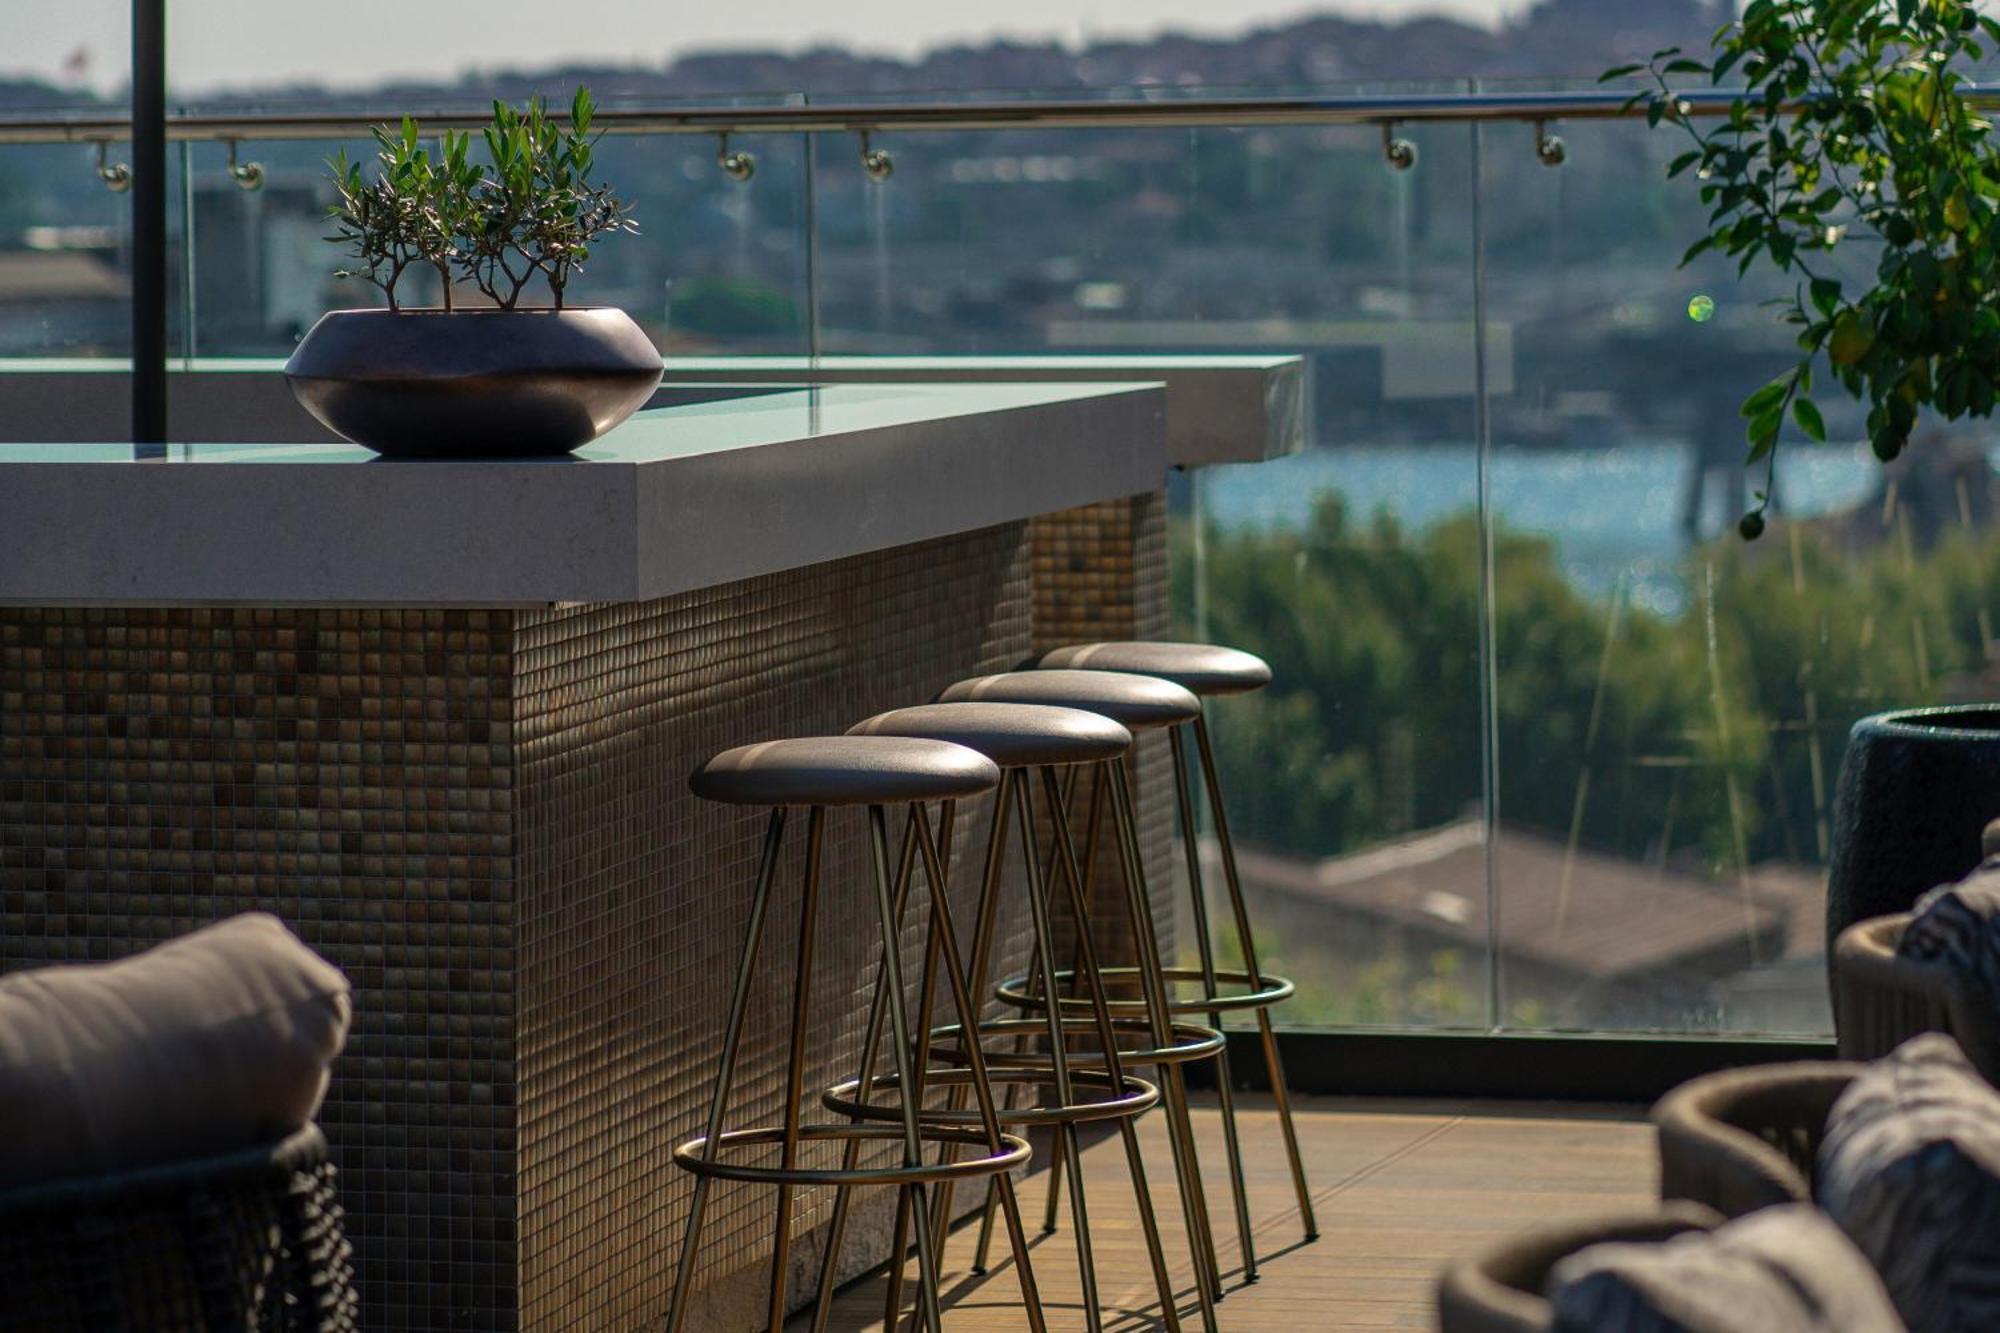 The Bank Hotel Istanbul, A Member Of Design Hotels Exterior foto